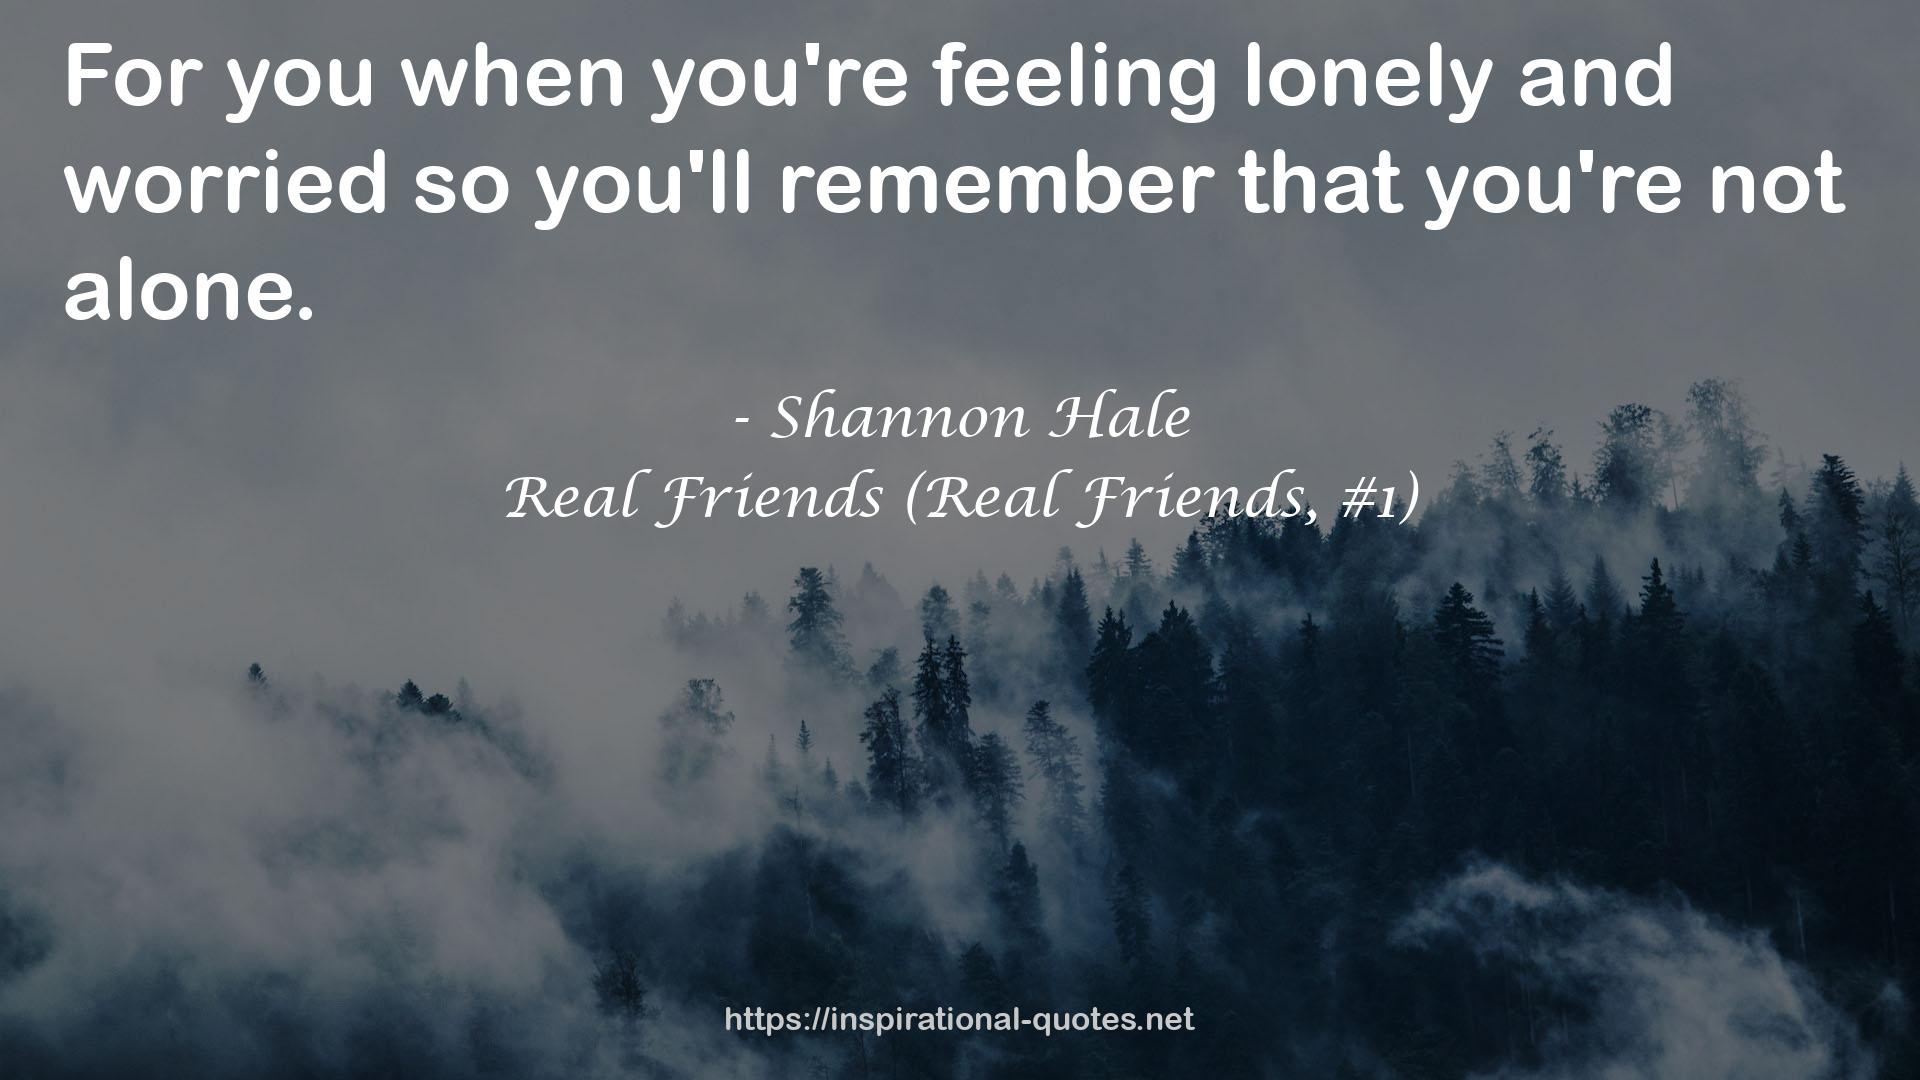 Real Friends (Real Friends, #1) QUOTES